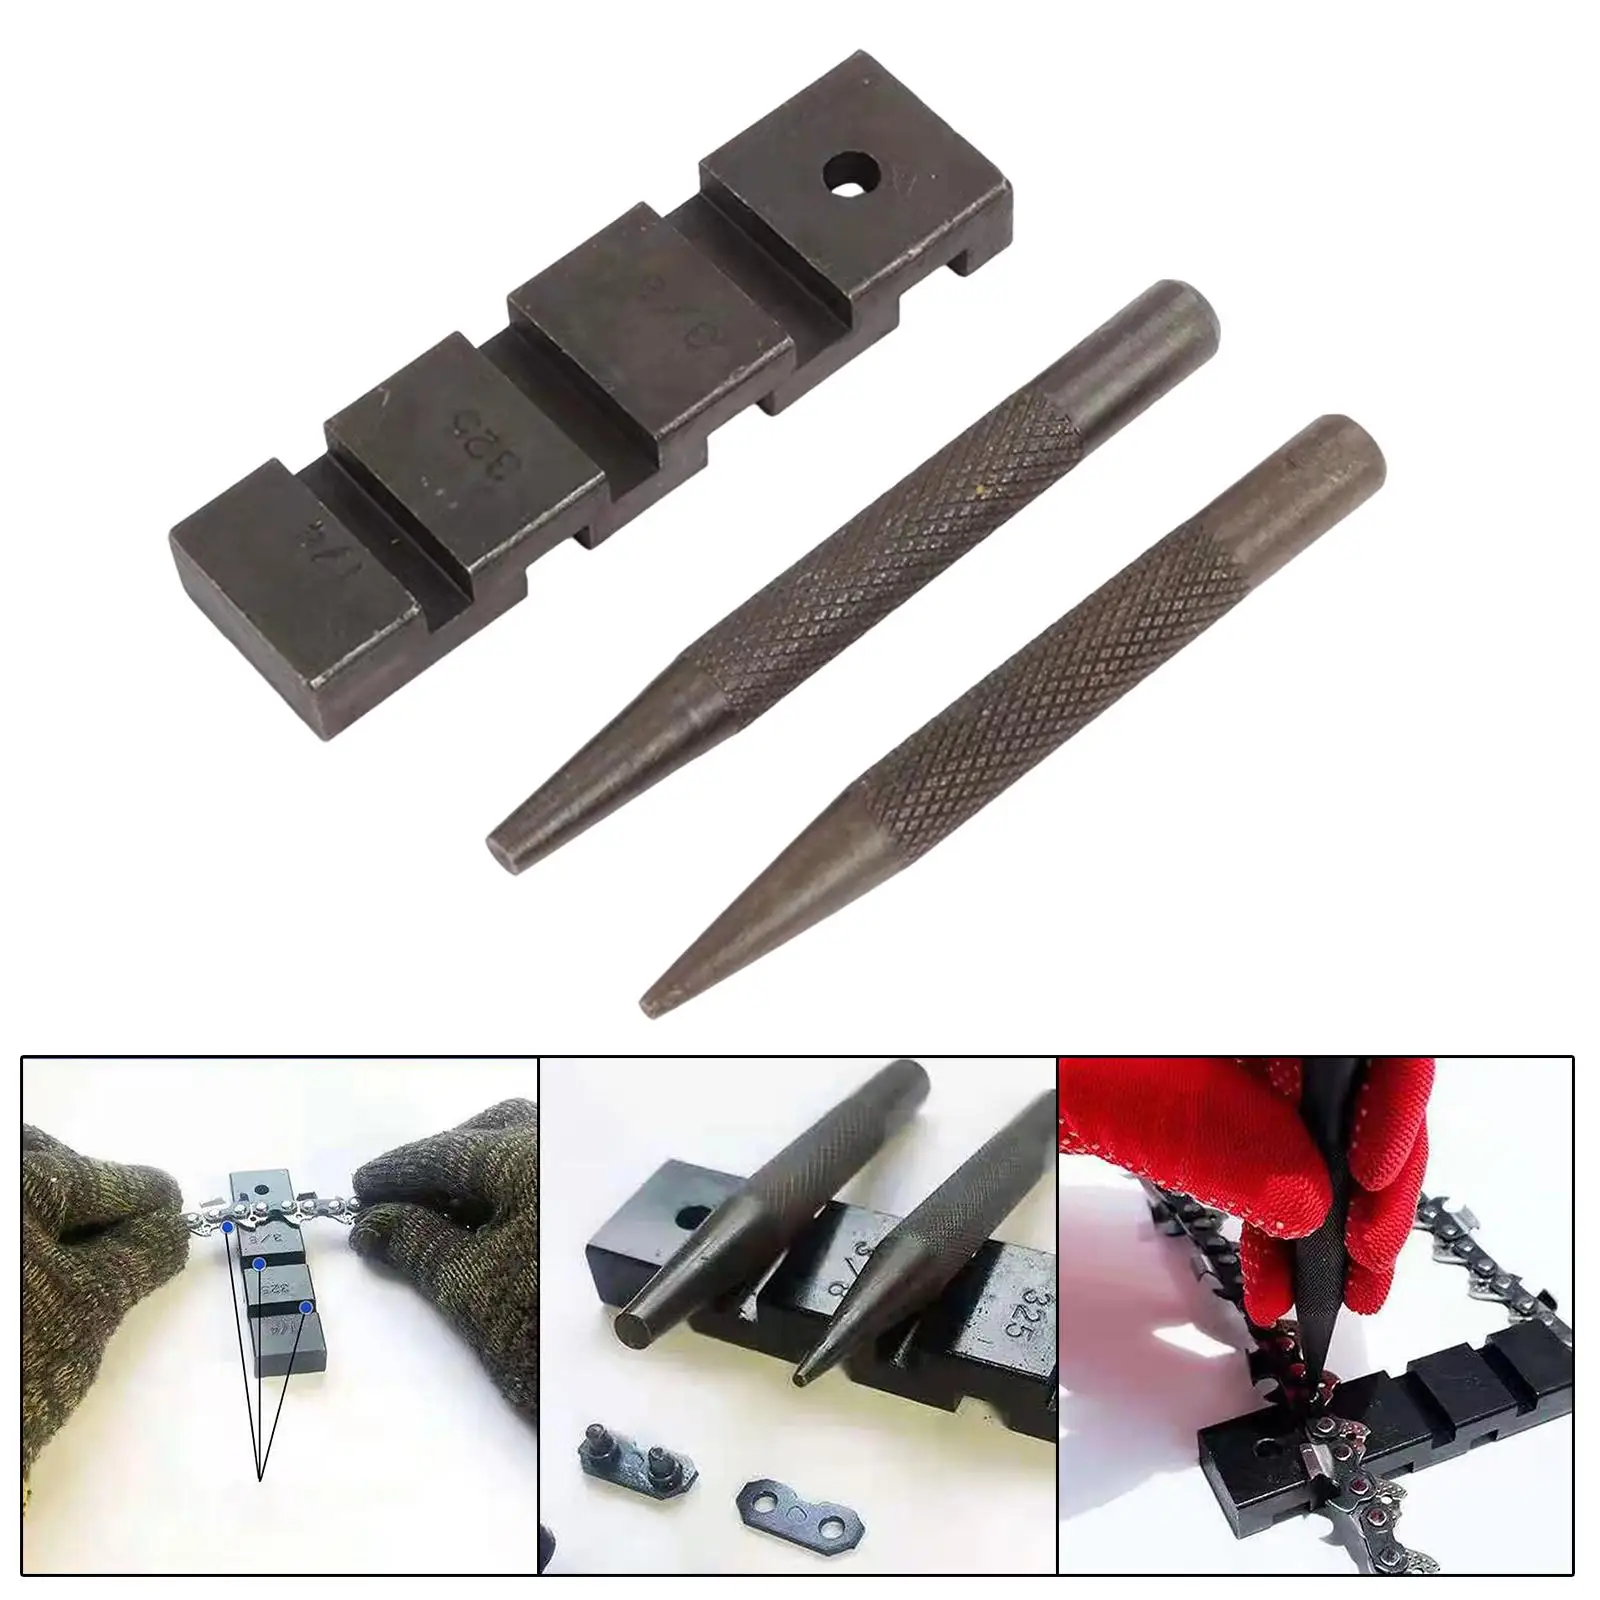 Chainsaw Removal Breaker Repairing Tools Set Chains Breaker for Garage